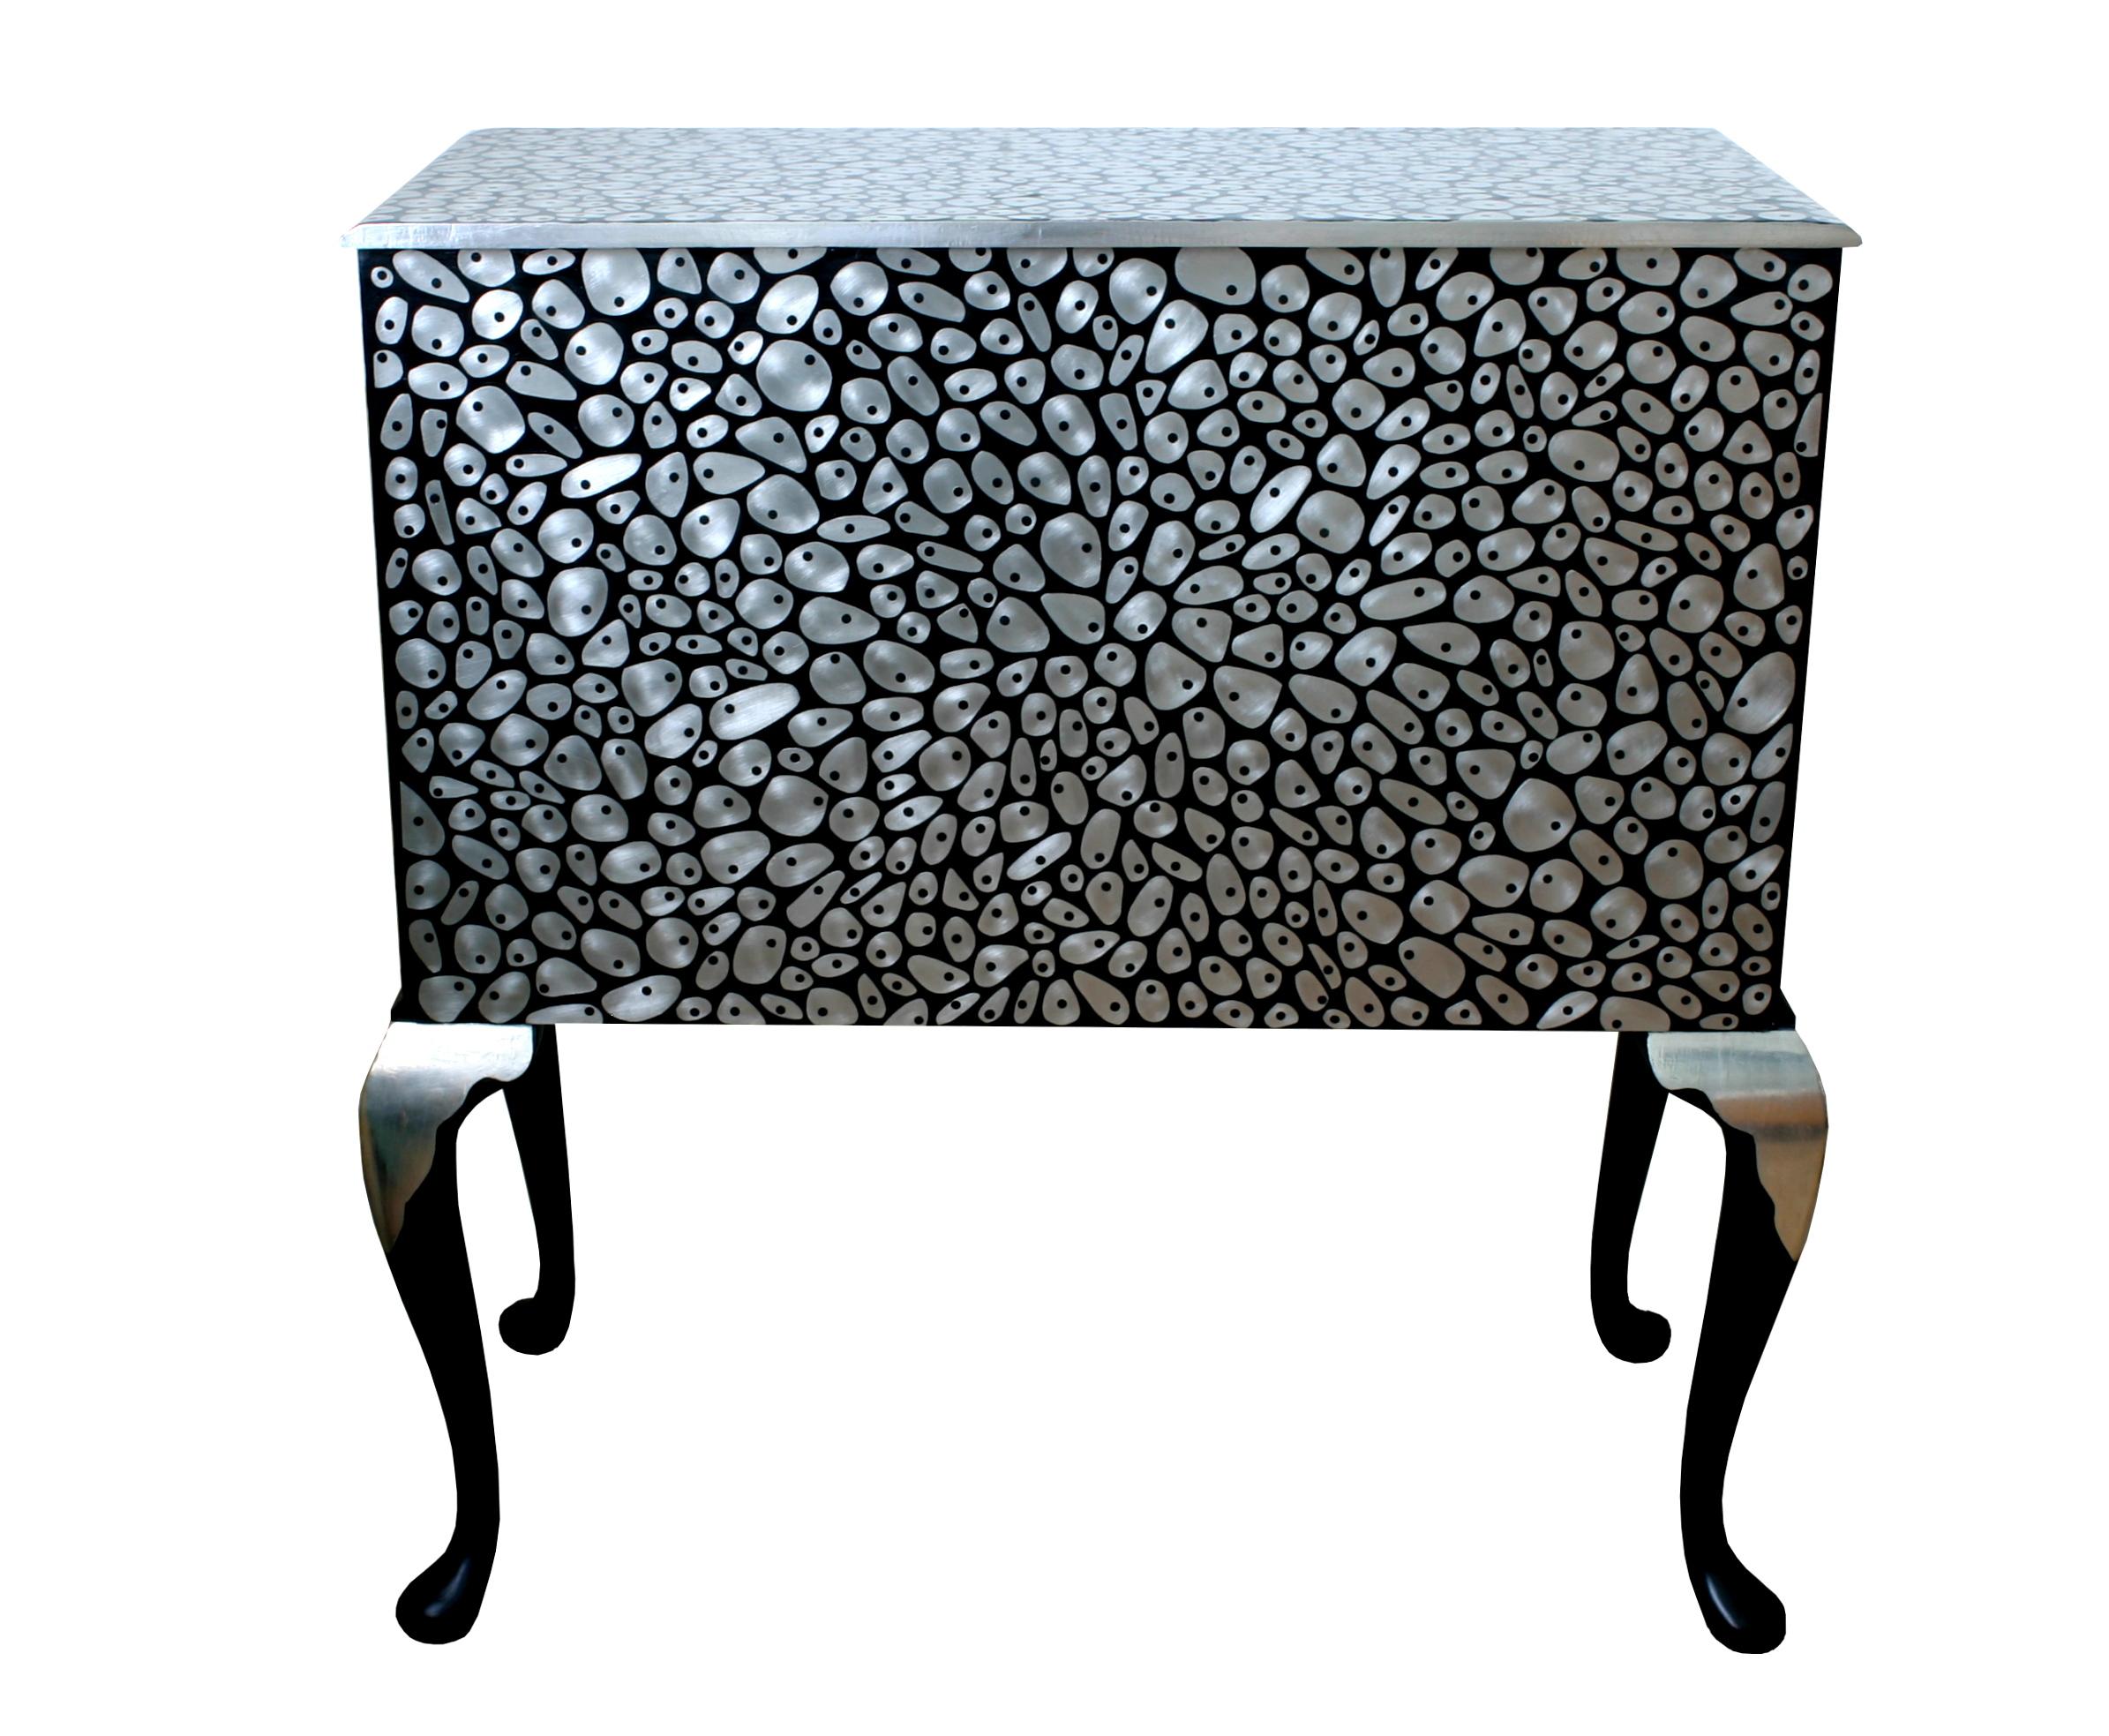 Polished Kate Noakes 'C-Foam' Cabinet For Sale